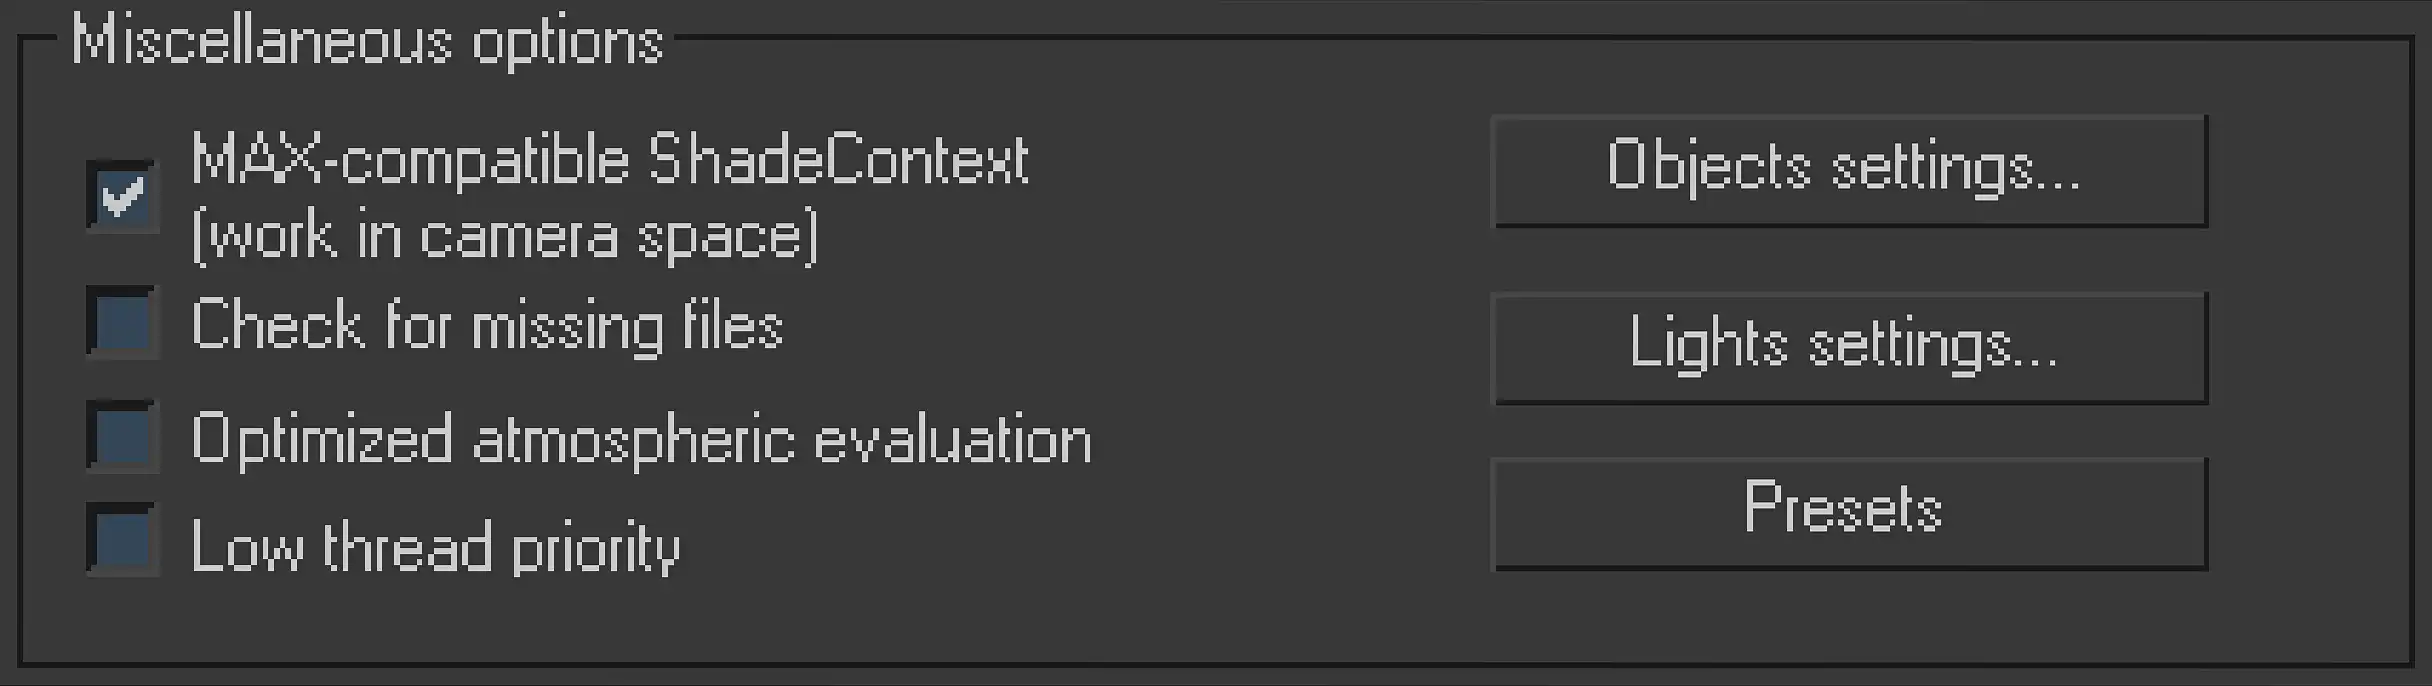 Screenshot of Miscellaneous options section from V-Ray:: System rollout.